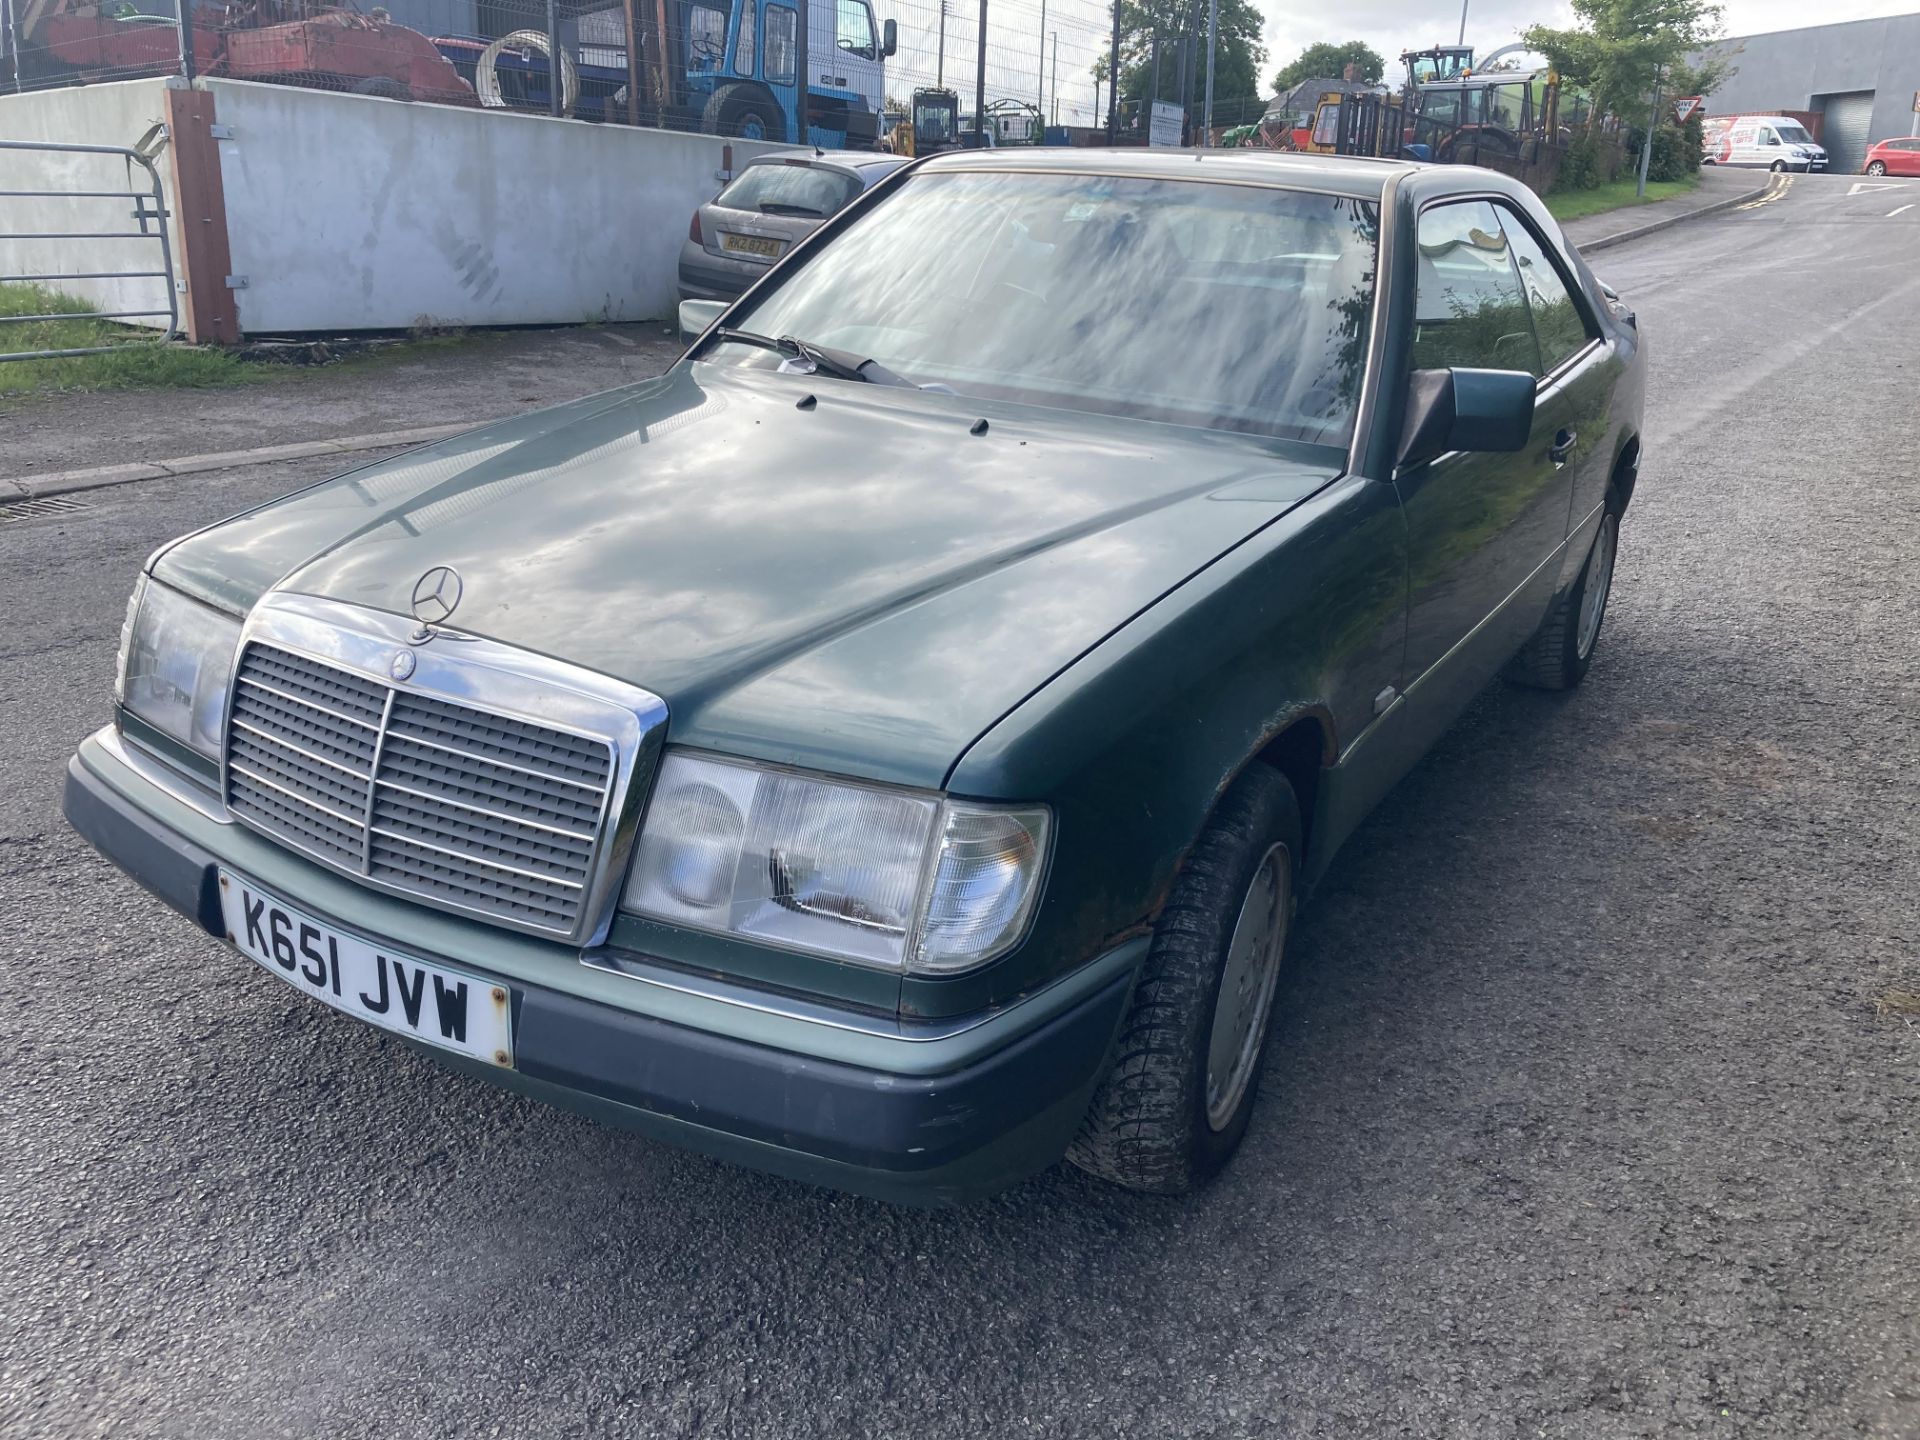 1992 MERCEDES 230E CLASSIC COUPE LOW RESERVE .LOCATION NORTHERN IRELAND. - Image 2 of 6